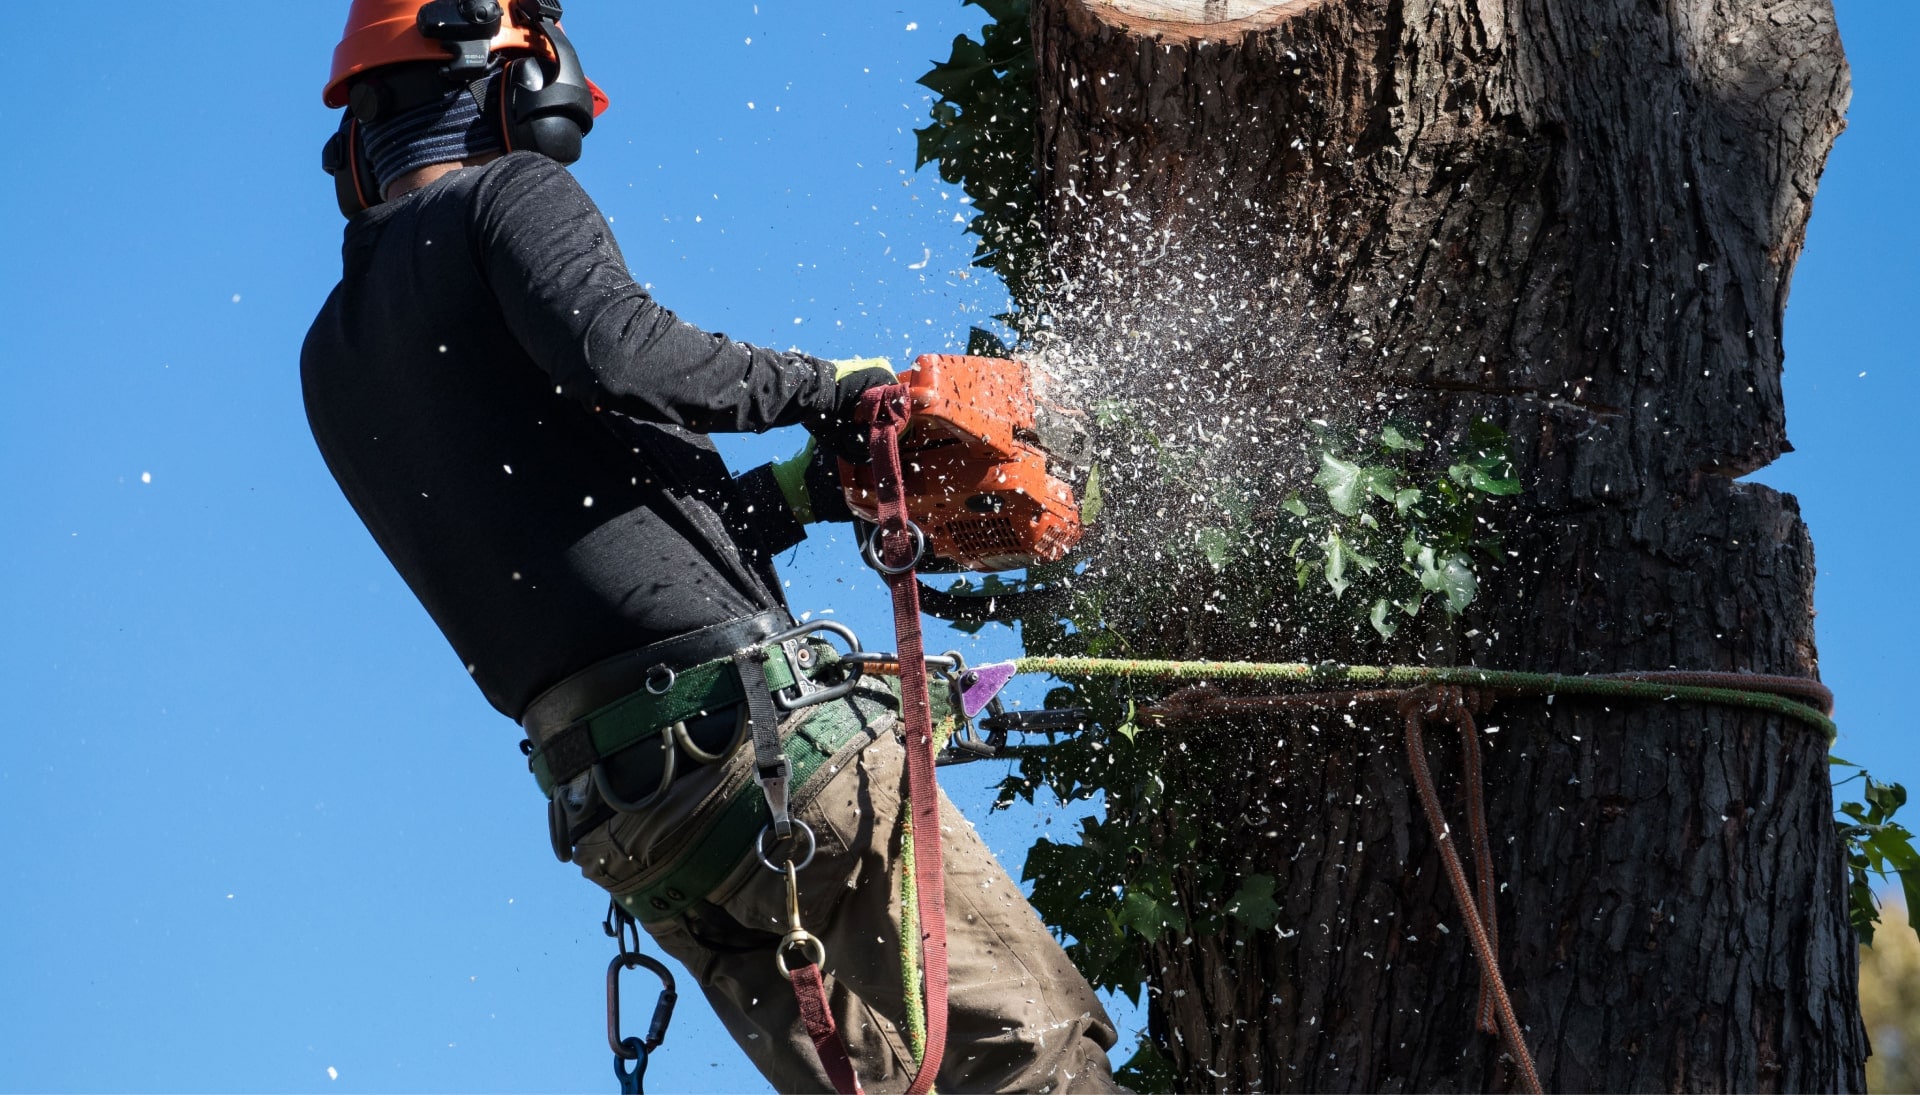 A tree removal expert is high in tree to cut down stump in Denton TX.